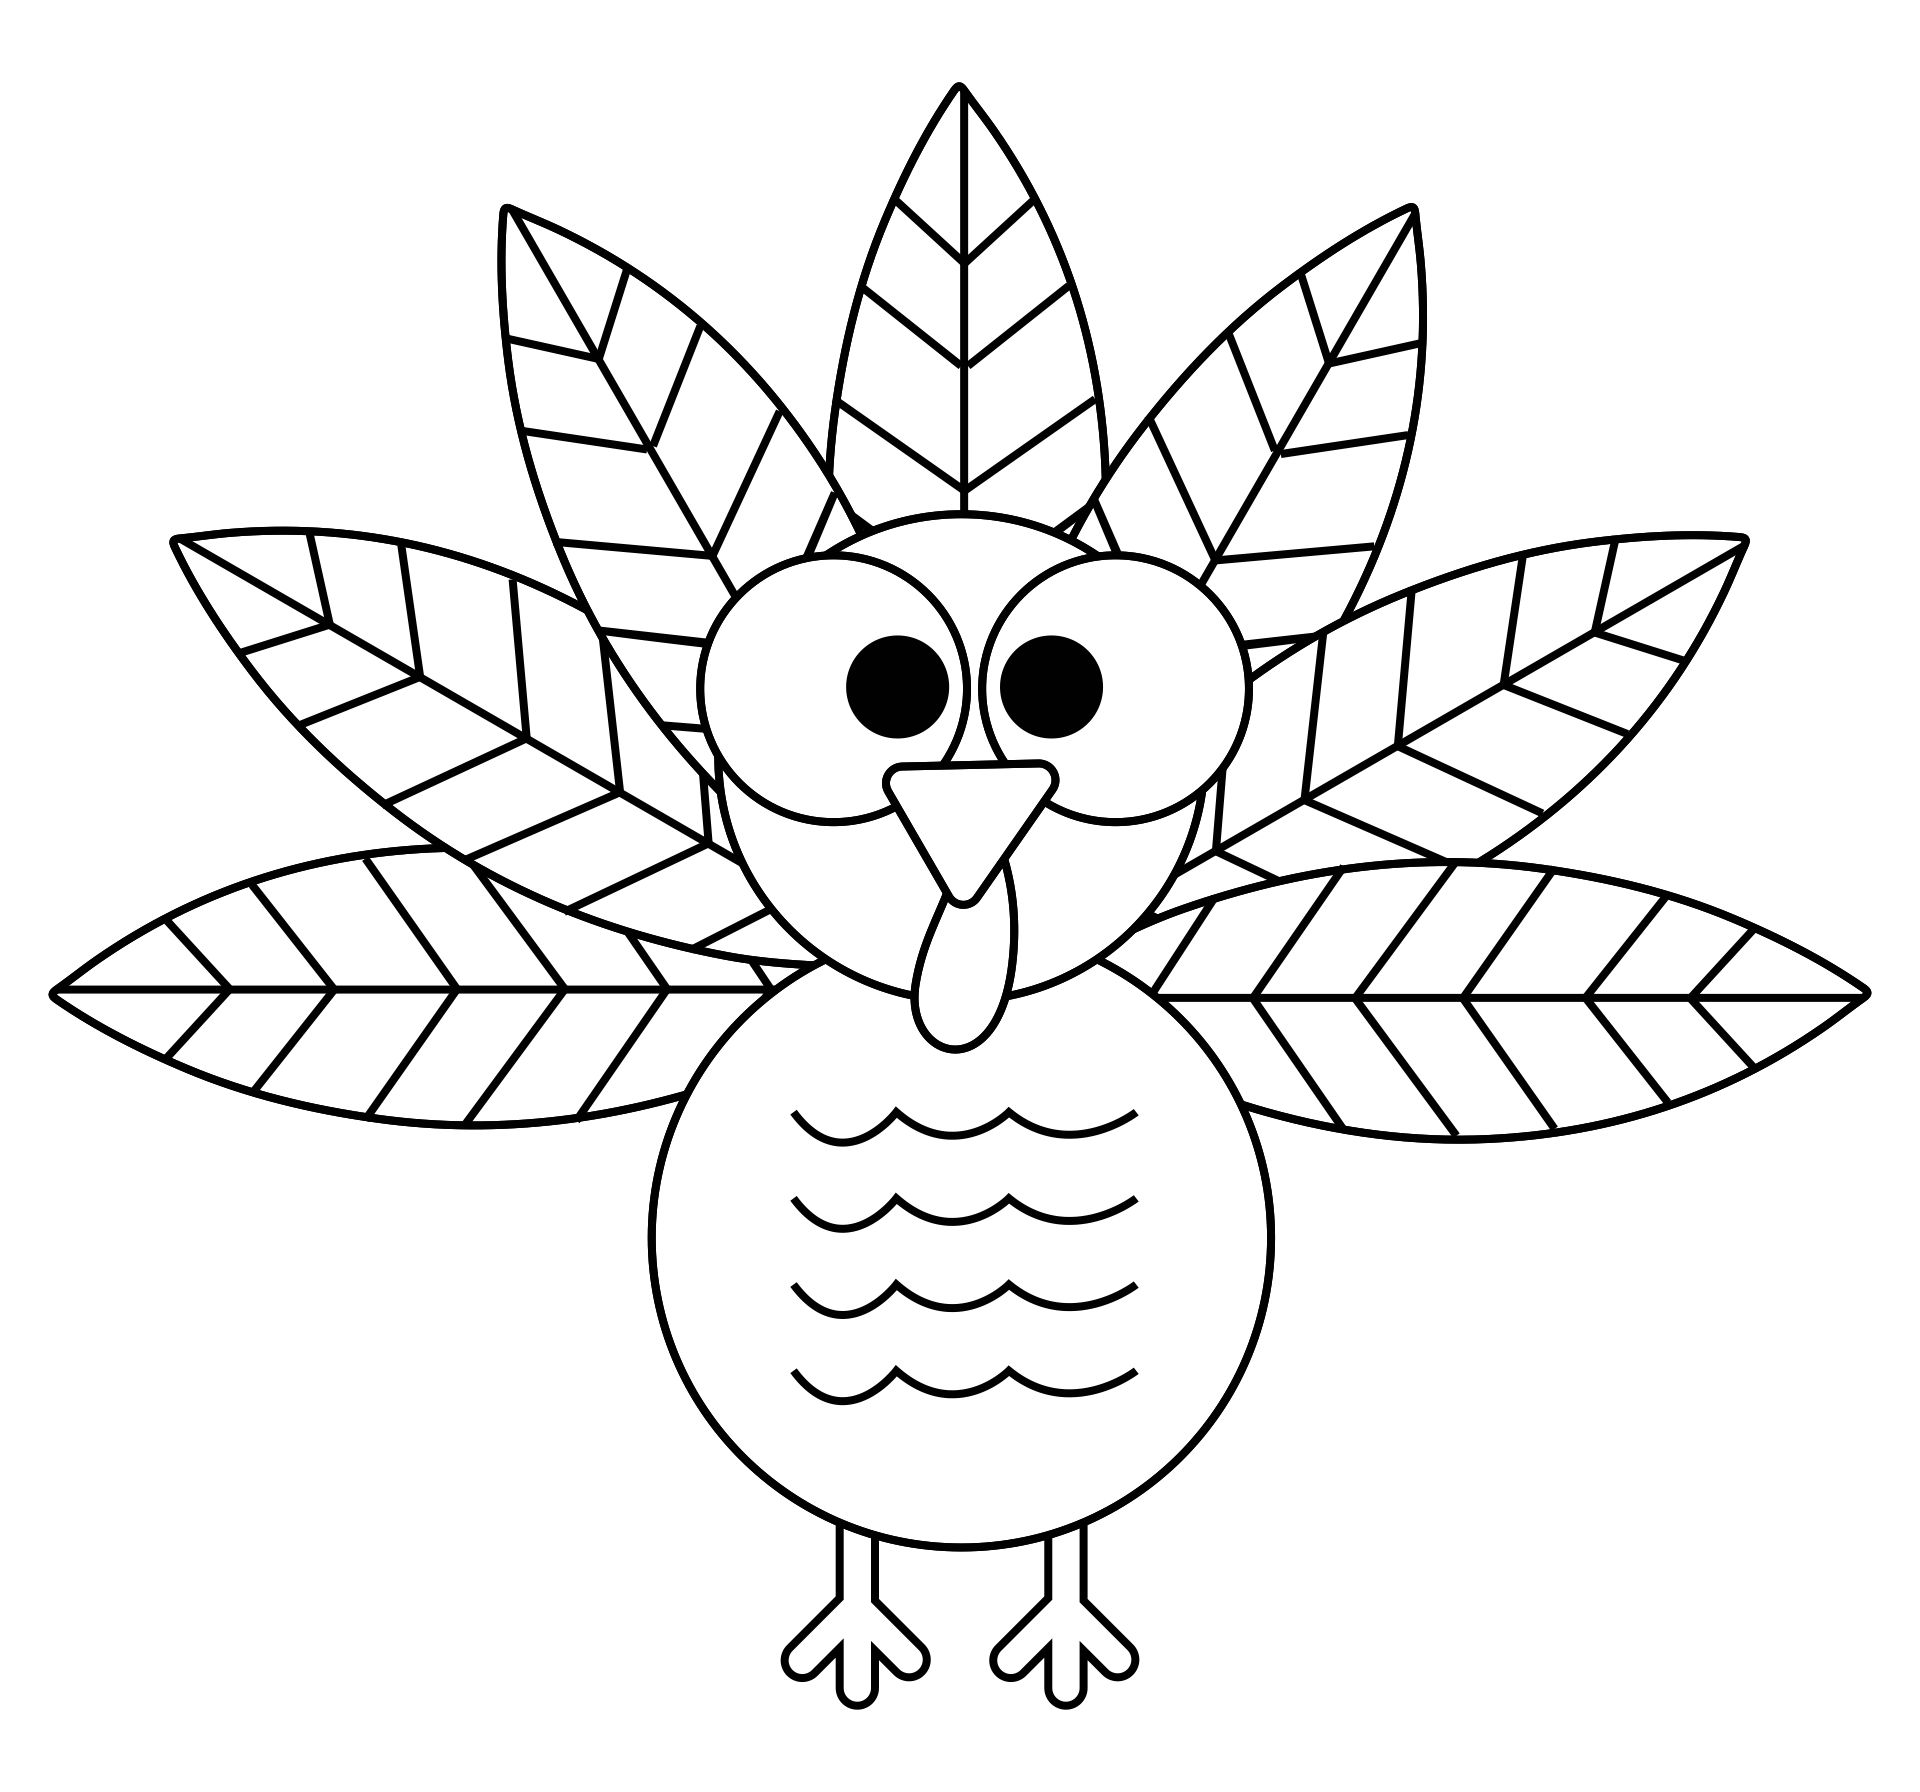 Printable Thanksgiving Coloring Page Activity For Toddlers And Preschool